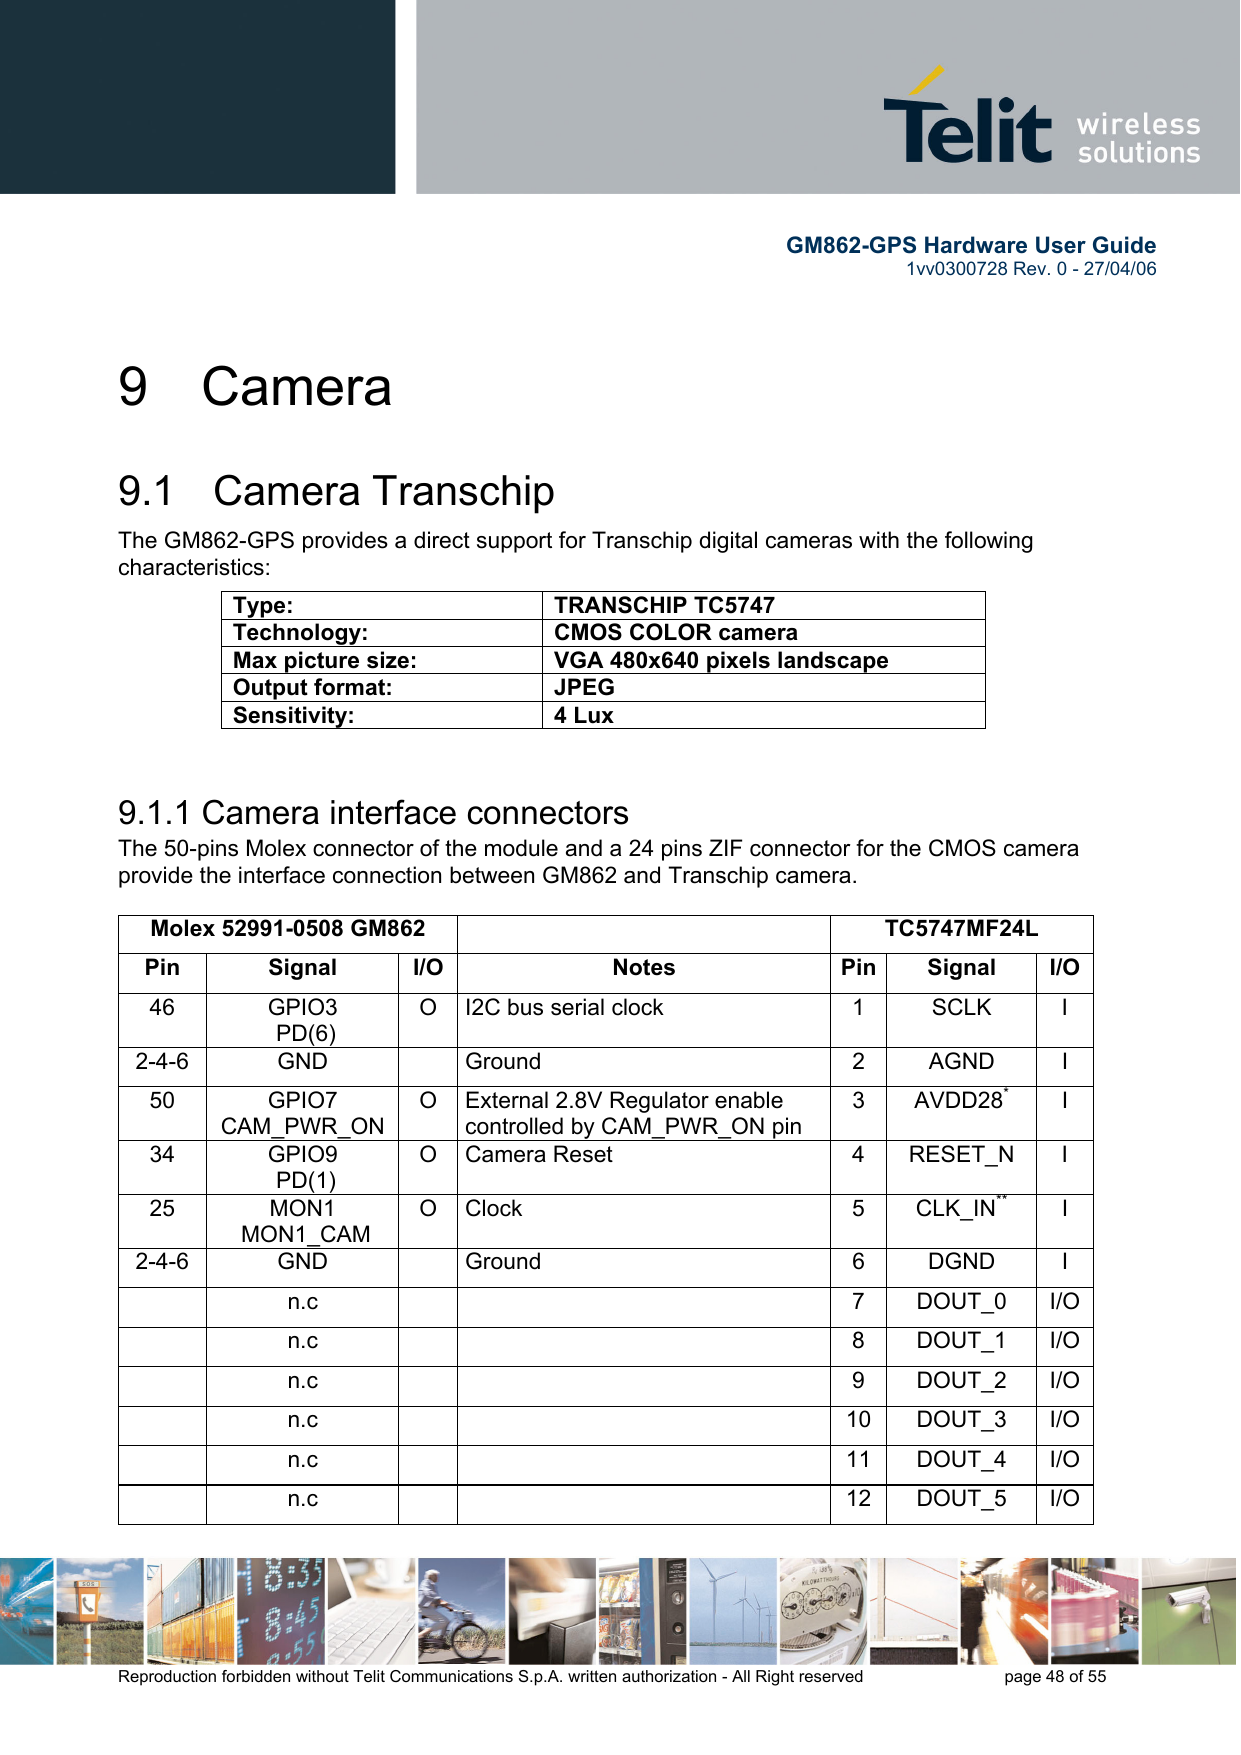        GM862-GPS Hardware User Guide   1vv0300728 Rev. 0 - 27/04/06    Reproduction forbidden without Telit Communications S.p.A. written authorization - All Right reserved    page 48 of 55  9 Camera 9.1   Camera Transchip The GM862-GPS provides a direct support for Transchip digital cameras with the following characteristics:  9.1.1 Camera interface connectors The 50-pins Molex connector of the module and a 24 pins ZIF connector for the CMOS camera provide the interface connection between GM862 and Transchip camera.  Molex 52991-0508 GM862   TC5747MF24L Pin Signal I/O  Notes  Pin Signal I/O46 GPIO3  PD(6) O  I2C bus serial clock  1  SCLK  I 2-4-6 GND   Ground  2 AGND I 50 GPIO7 CAM_PWR_ON O  External 2.8V Regulator enable controlled by CAM_PWR_ON pin 3 AVDD28* I 34 GPIO9  PD(1) O Camera Reset  4  RESET_N  I 25 MON1  MON1_CAM O Clock  5  CLK_IN** I 2-4-6 GND   Ground  6 DGND I  n.c    7 DOUT_0 I/O n.c    8 DOUT_1  I/O n.c    9 DOUT_2 I/O n.c    10 DOUT_3 I/O n.c    11 DOUT_4 I/O n.c    12 DOUT_5 I/OType: TRANSCHIP TC5747 Technology:  CMOS COLOR camera Max picture size:  VGA 480x640 pixels landscape Output format:  JPEG Sensitivity: 4 Lux 